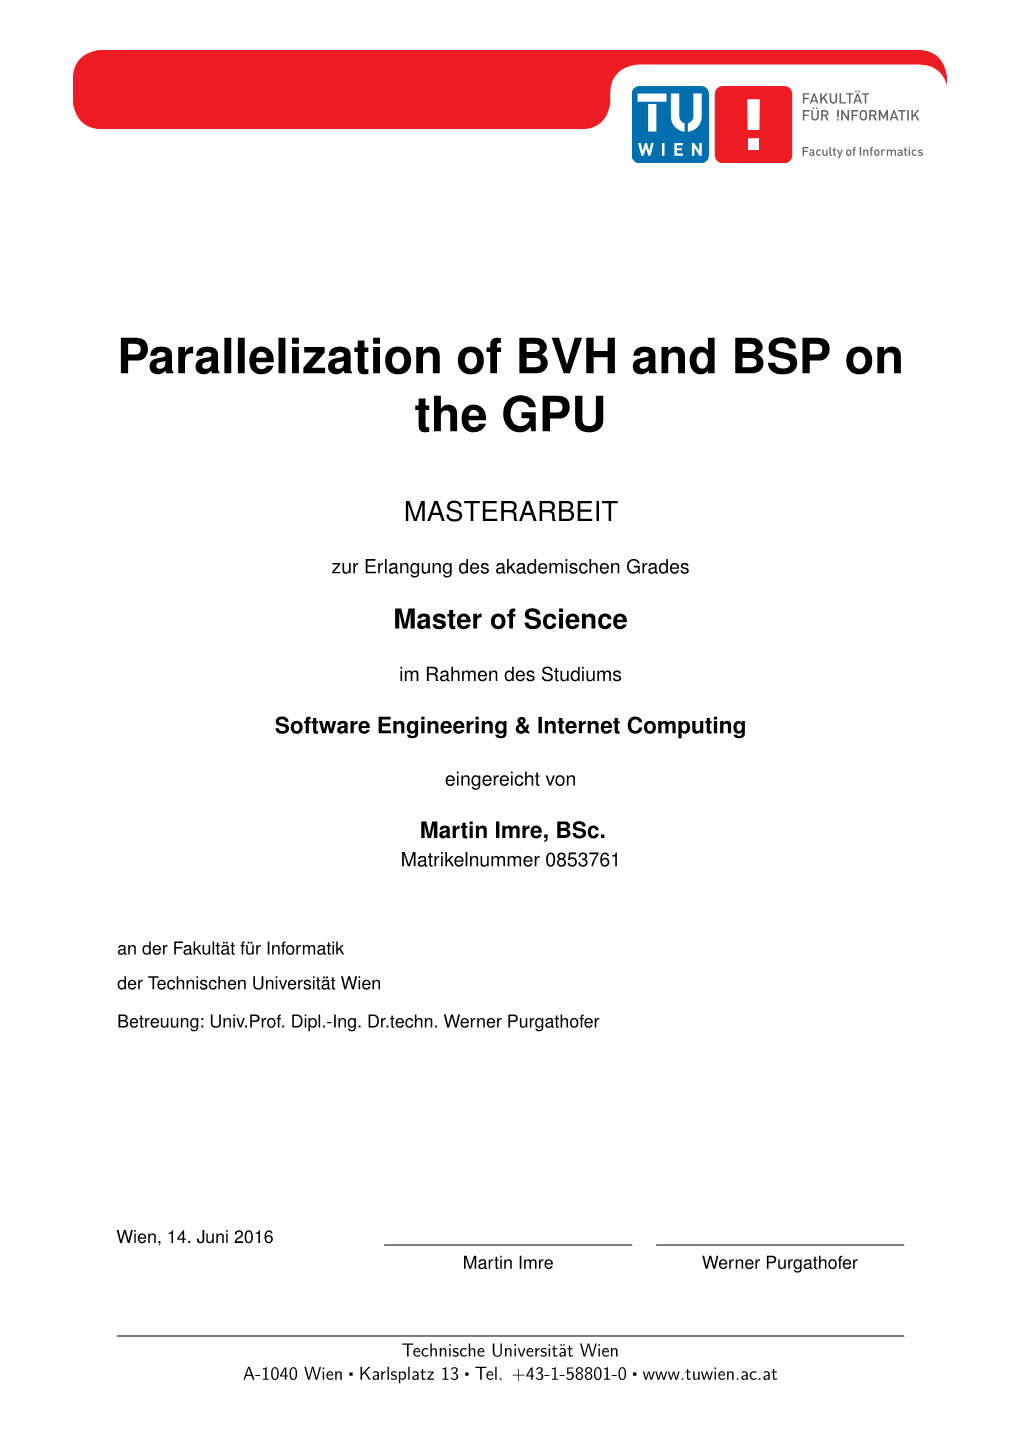 Parallelization of BVH and BSP on the GPU